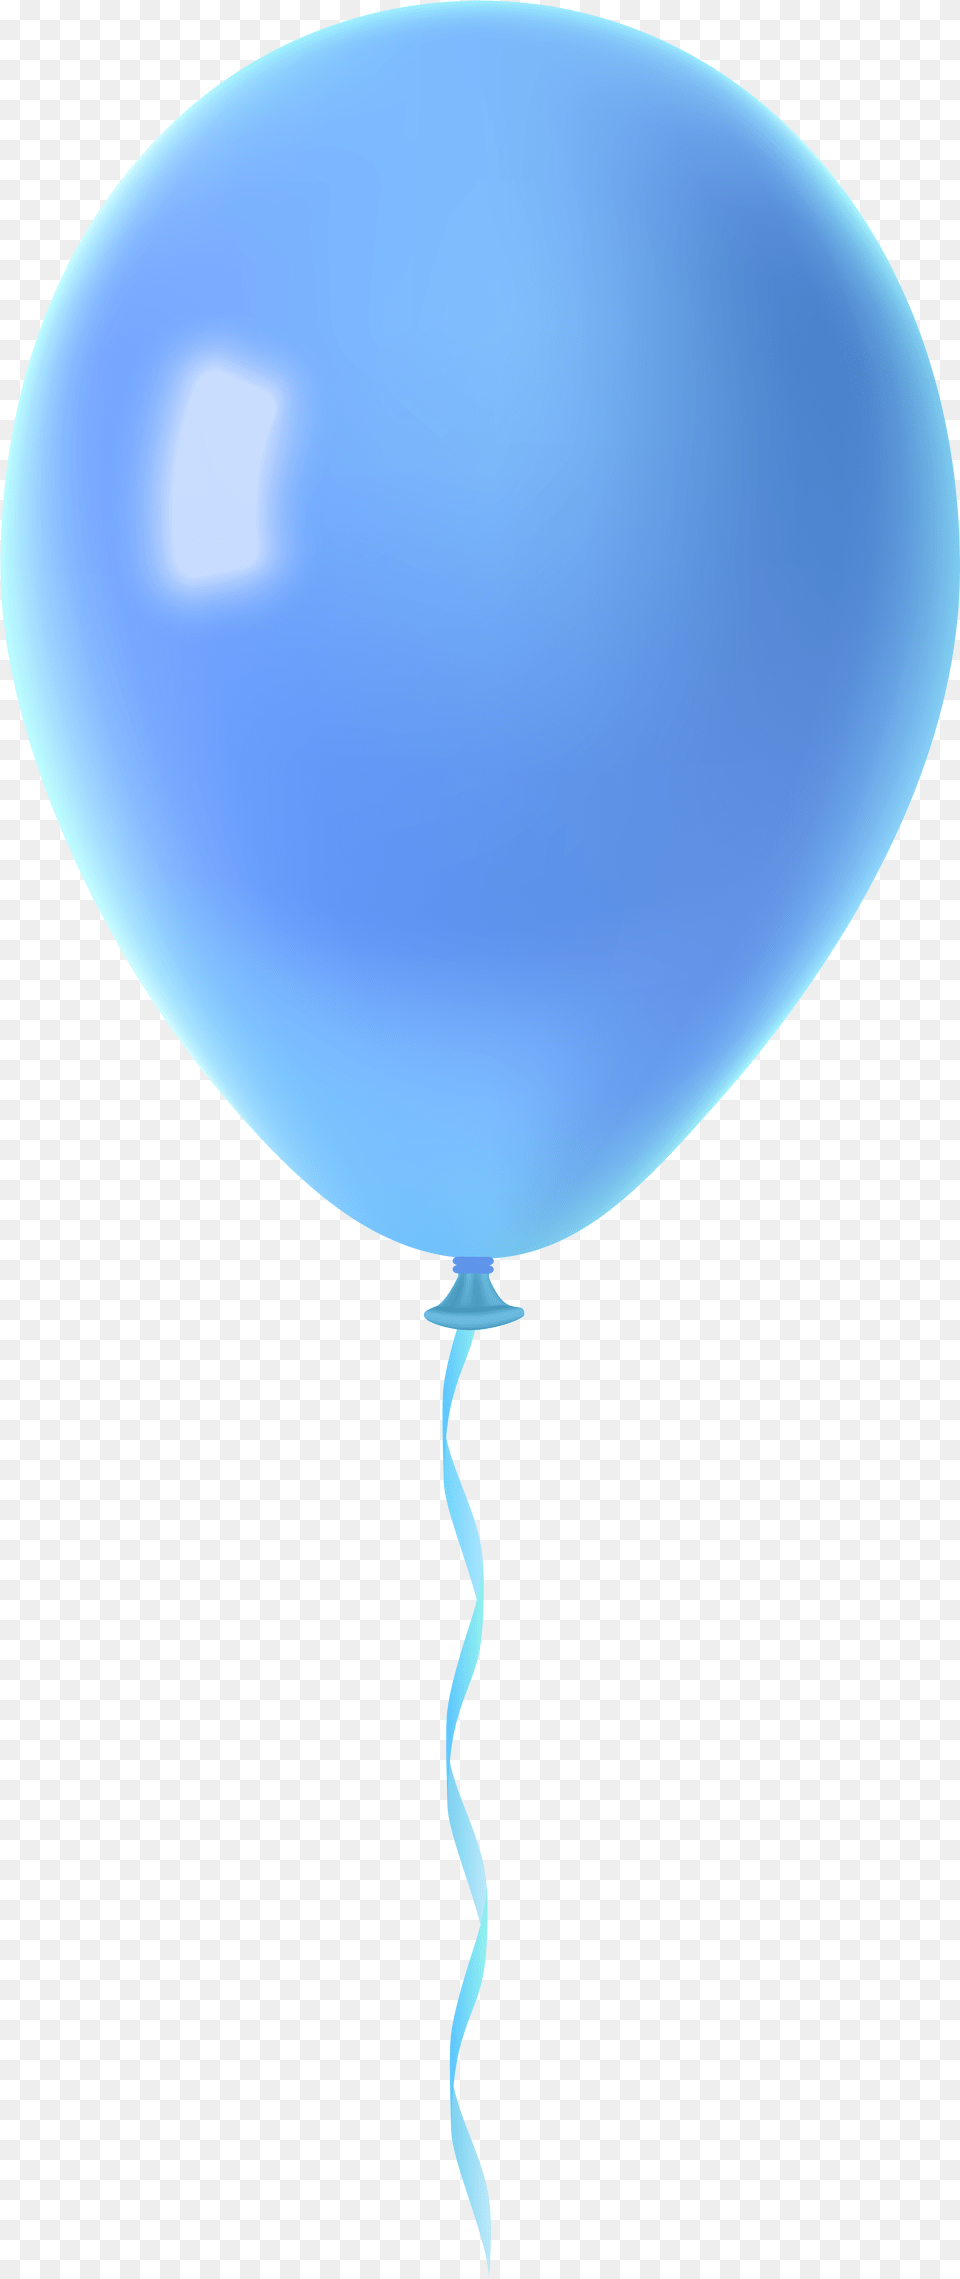 Party Ballons Image Blue Balloons, Balloon, Astronomy, Moon, Nature Free Transparent Png